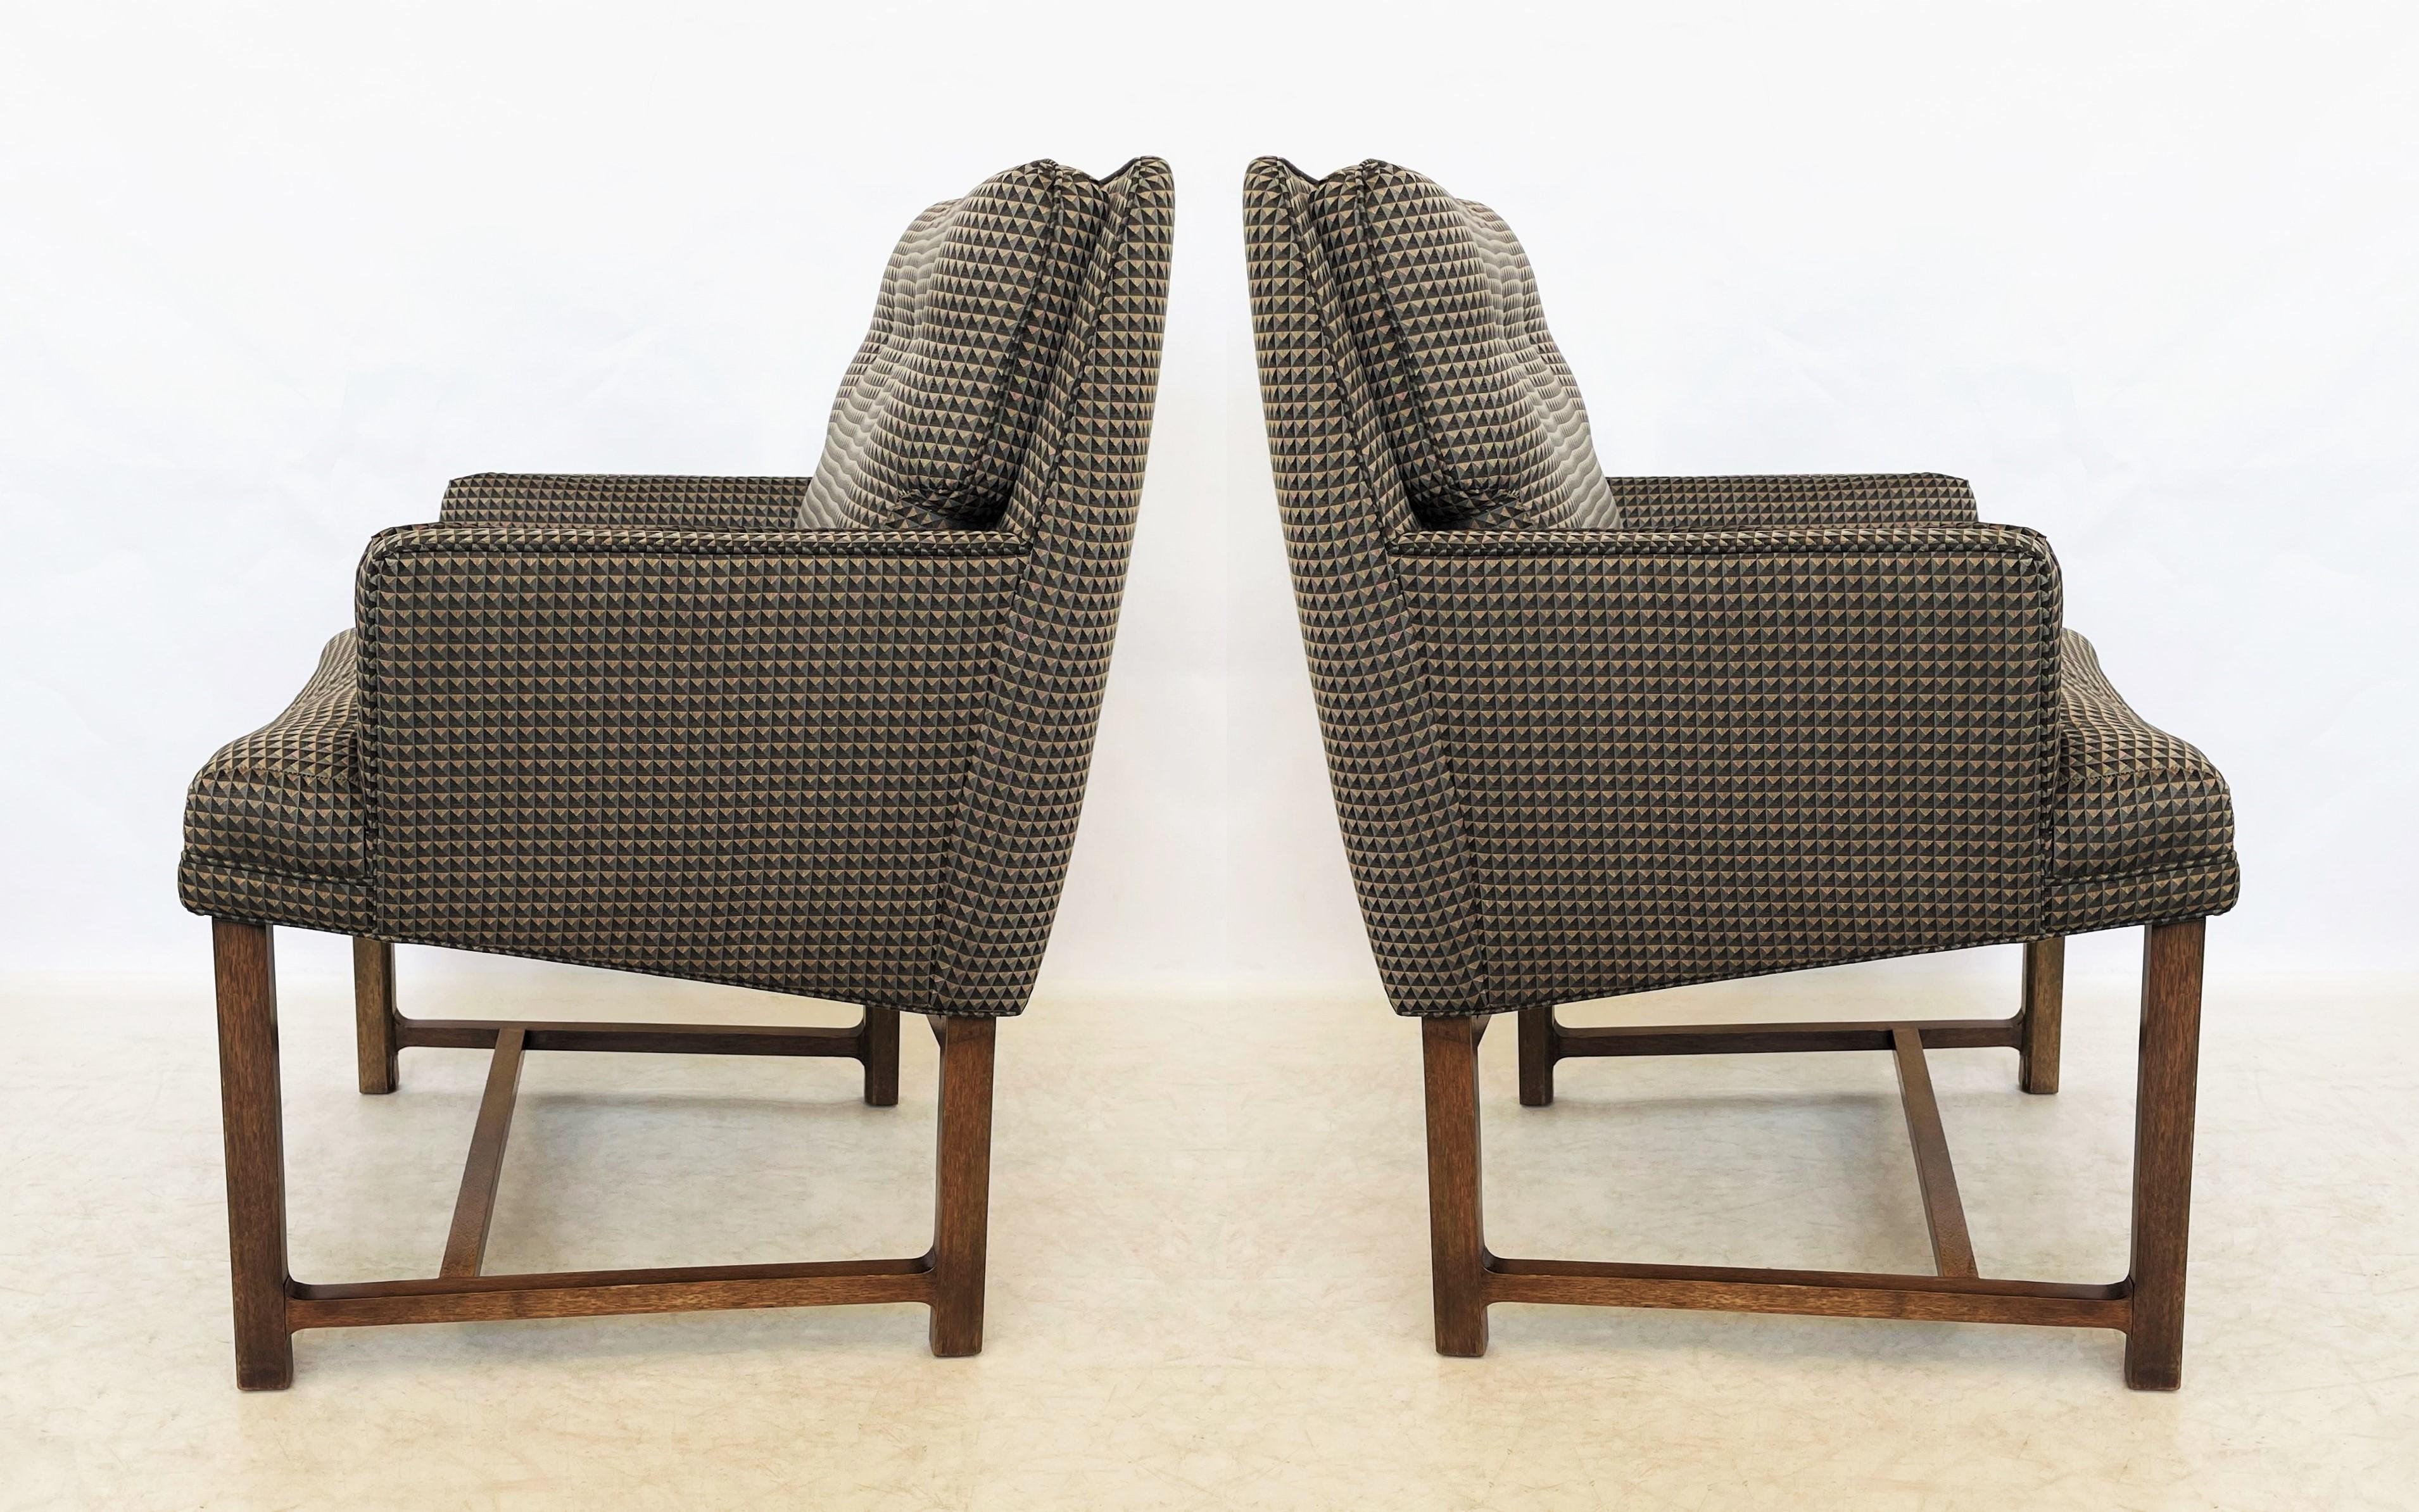 Upholstery Pair of Edward Wormley for Dunbar Lounge Chairs, 1950's